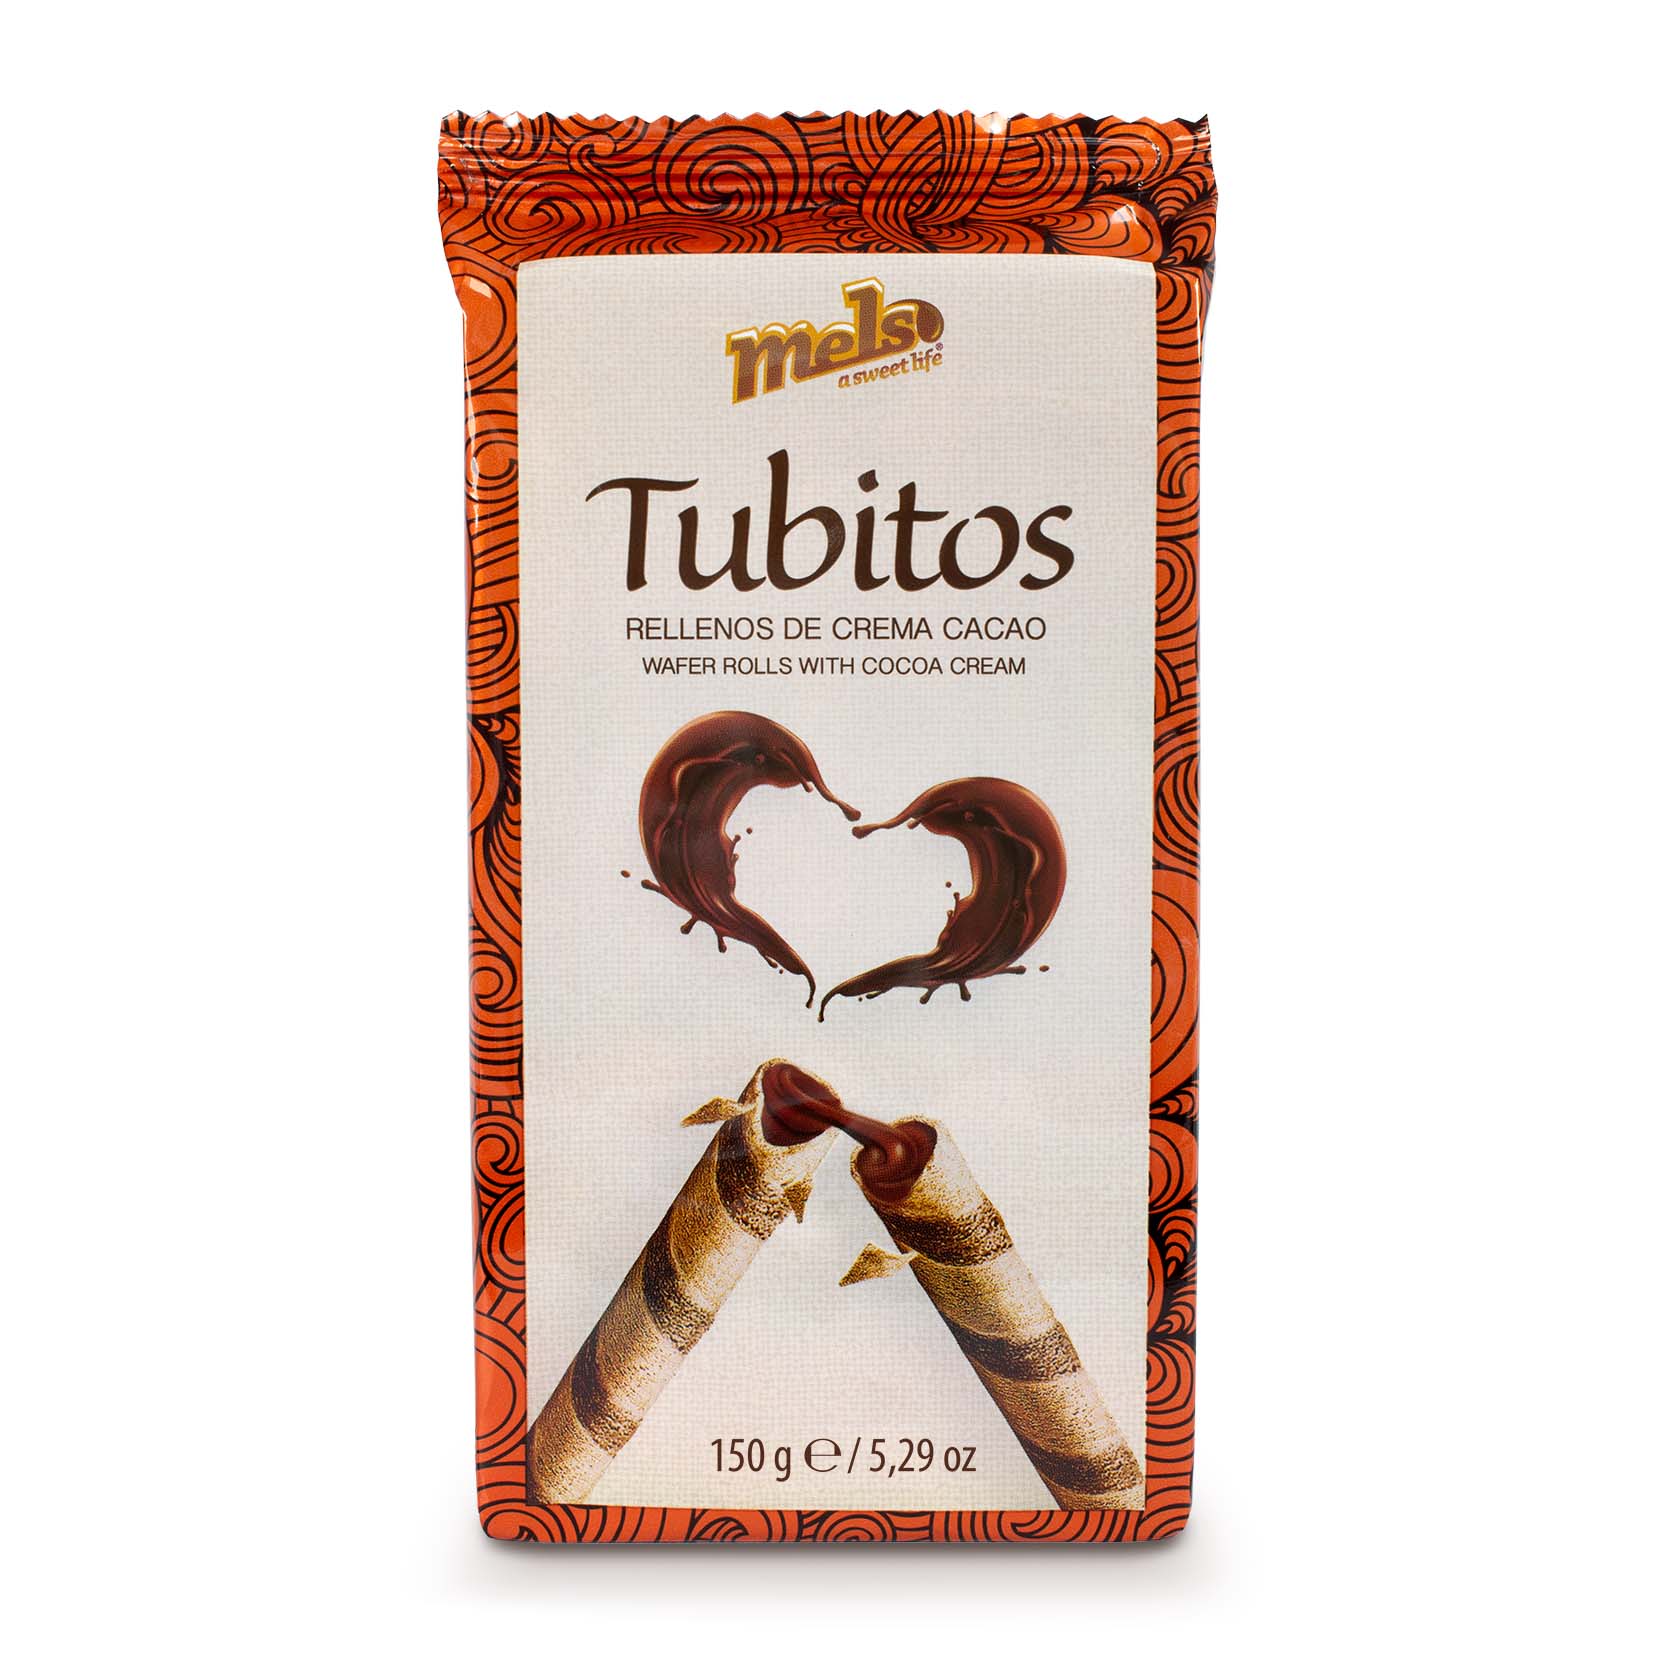 TUBITO RELL CACAO 150G MELS